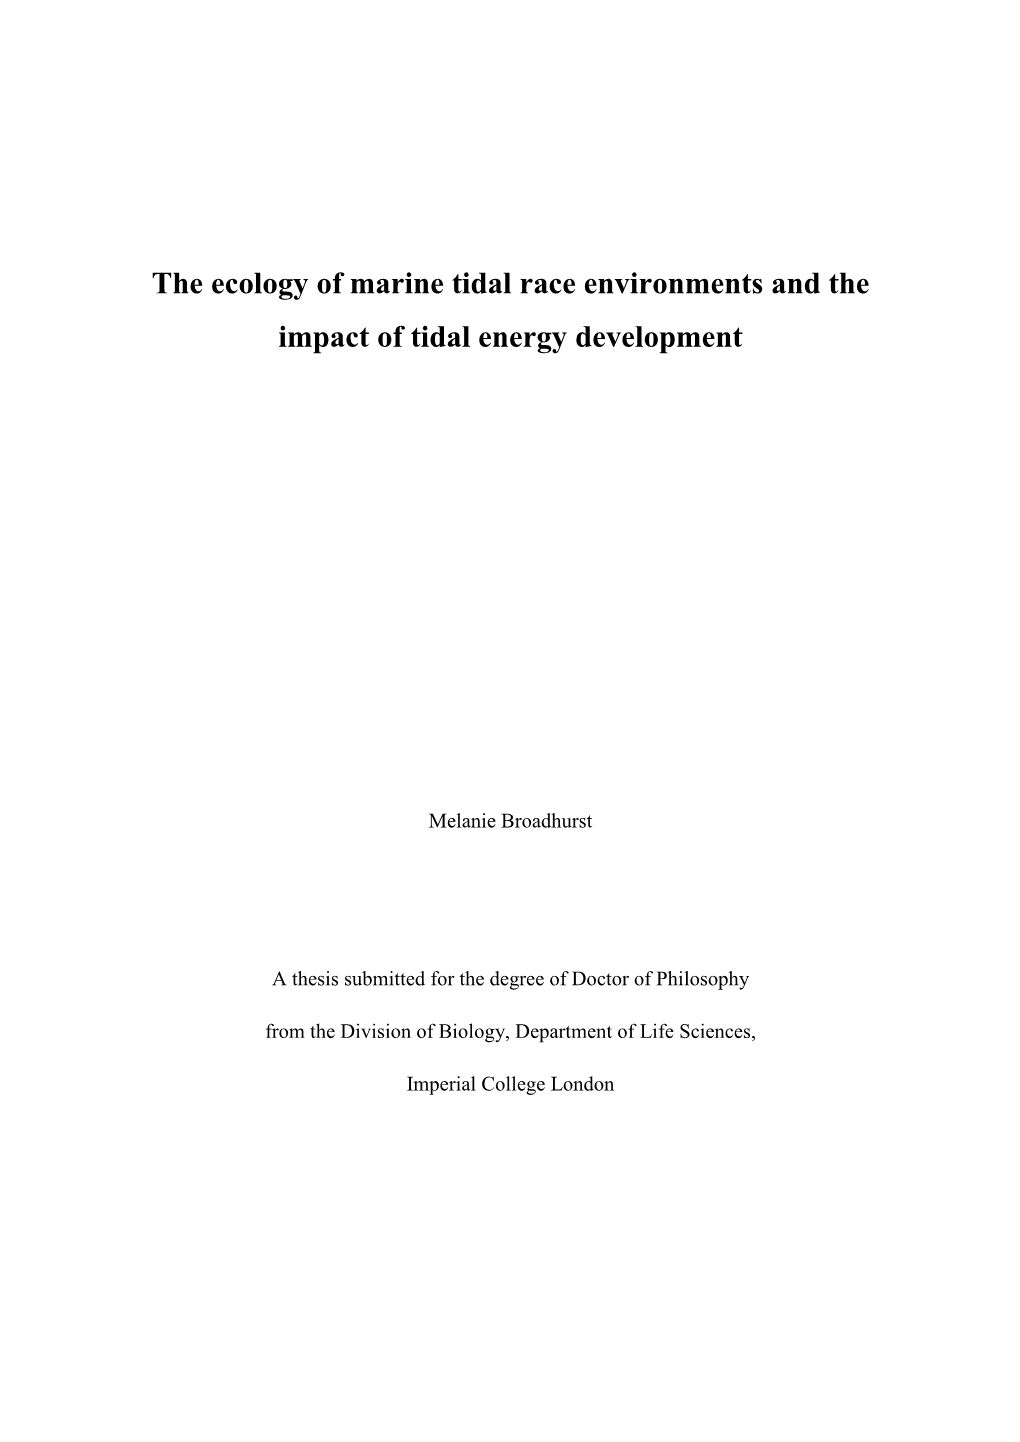 The Ecology of Marine Tidal Race Environments and the Impact of Tidal Energy Development